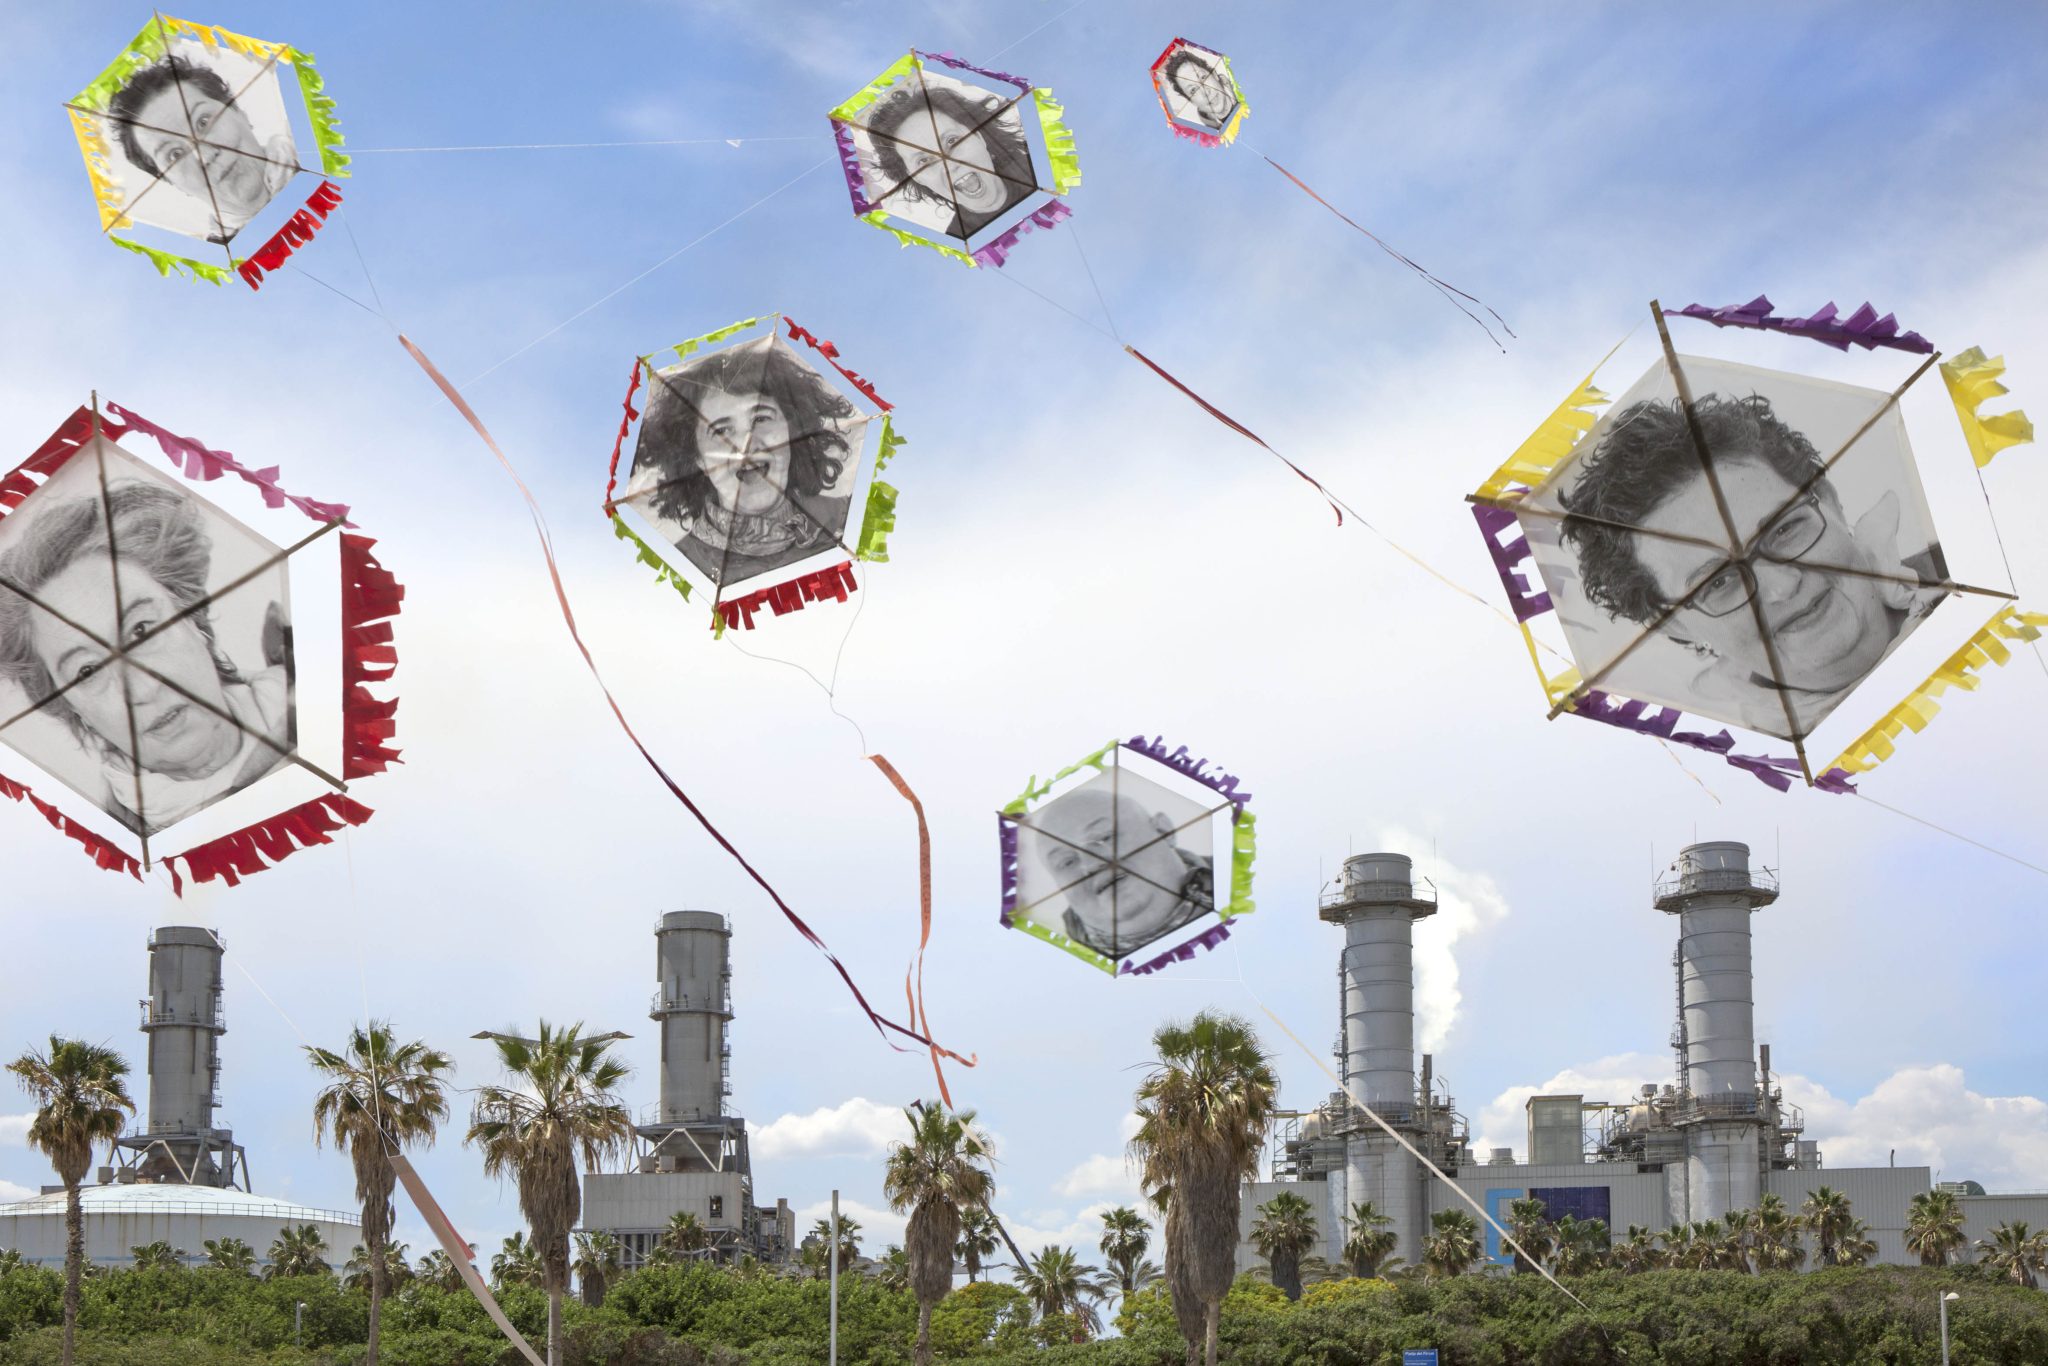 Large kites with people's faces fly over a power plant